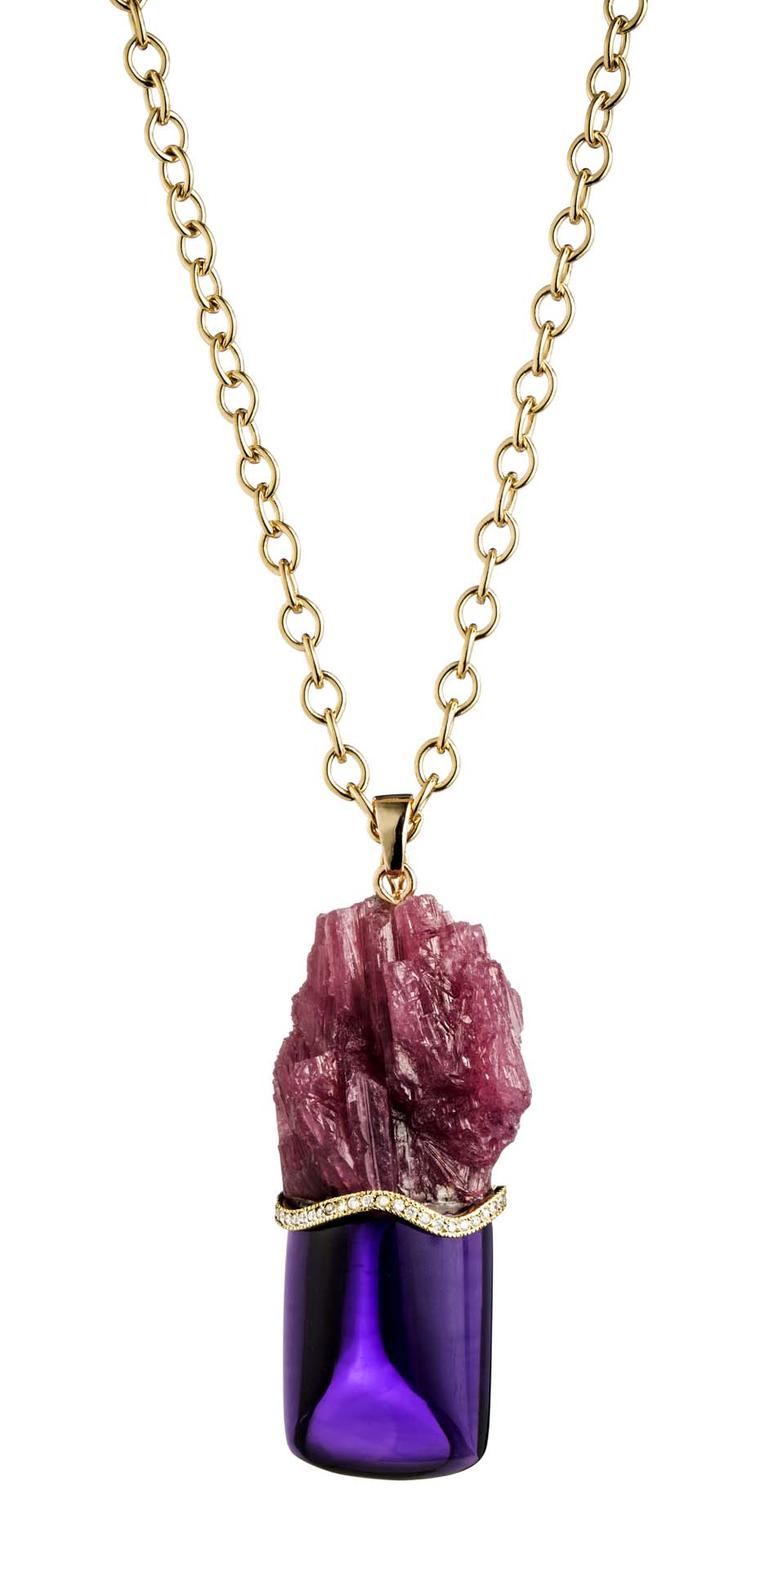 Kara Ross Petra Split pendant featuring raw rubellite alongside a smooth amethyst divided by pavé diamonds set in gold